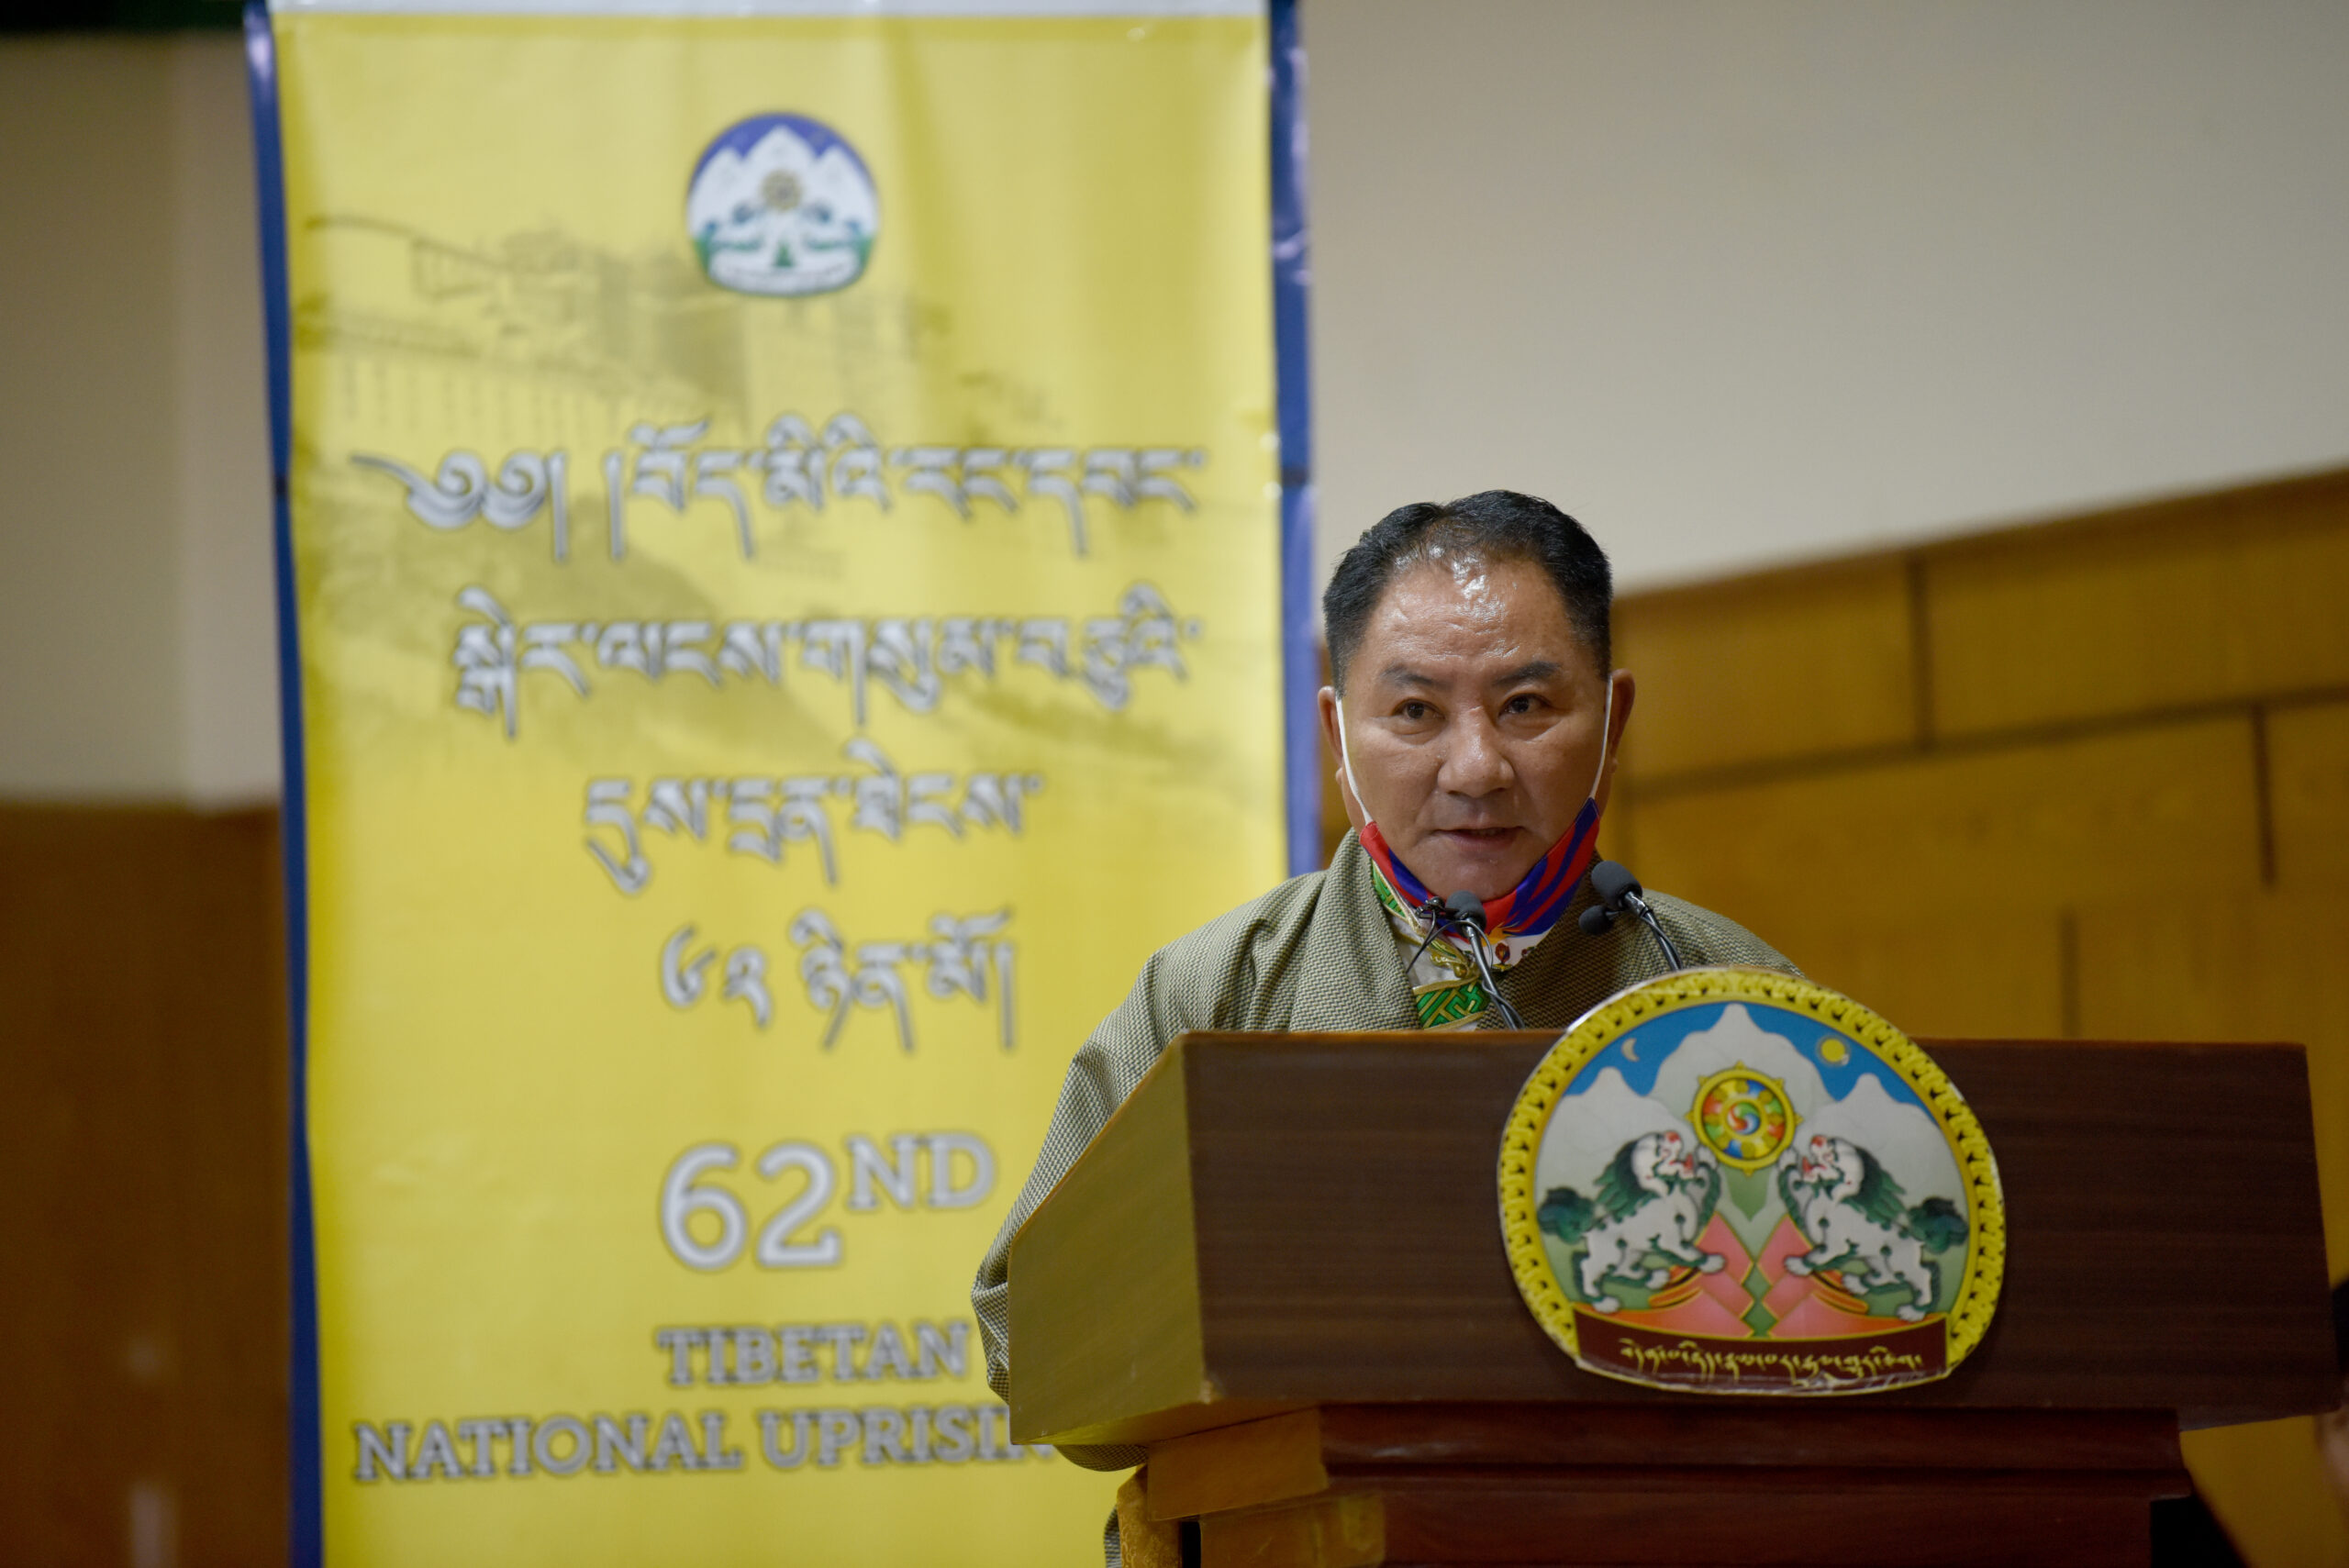 Statement of the Tibetan ParliamentinExile on the commemoration of